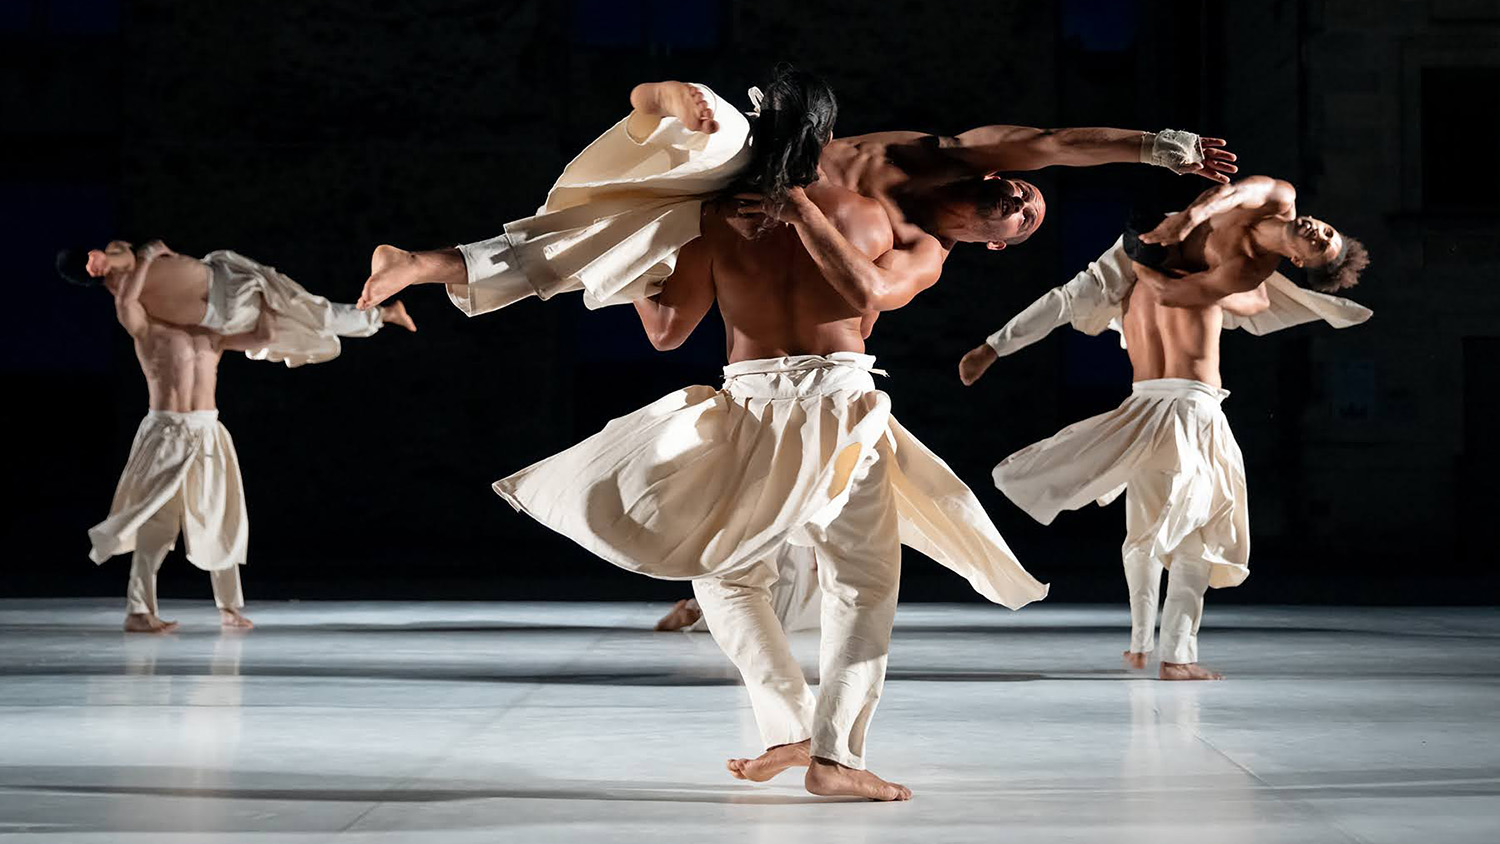 Compagnie Hervé KOUBI in Stewart Theatre was one of several recent sold-out. shows for NC State LIVE!